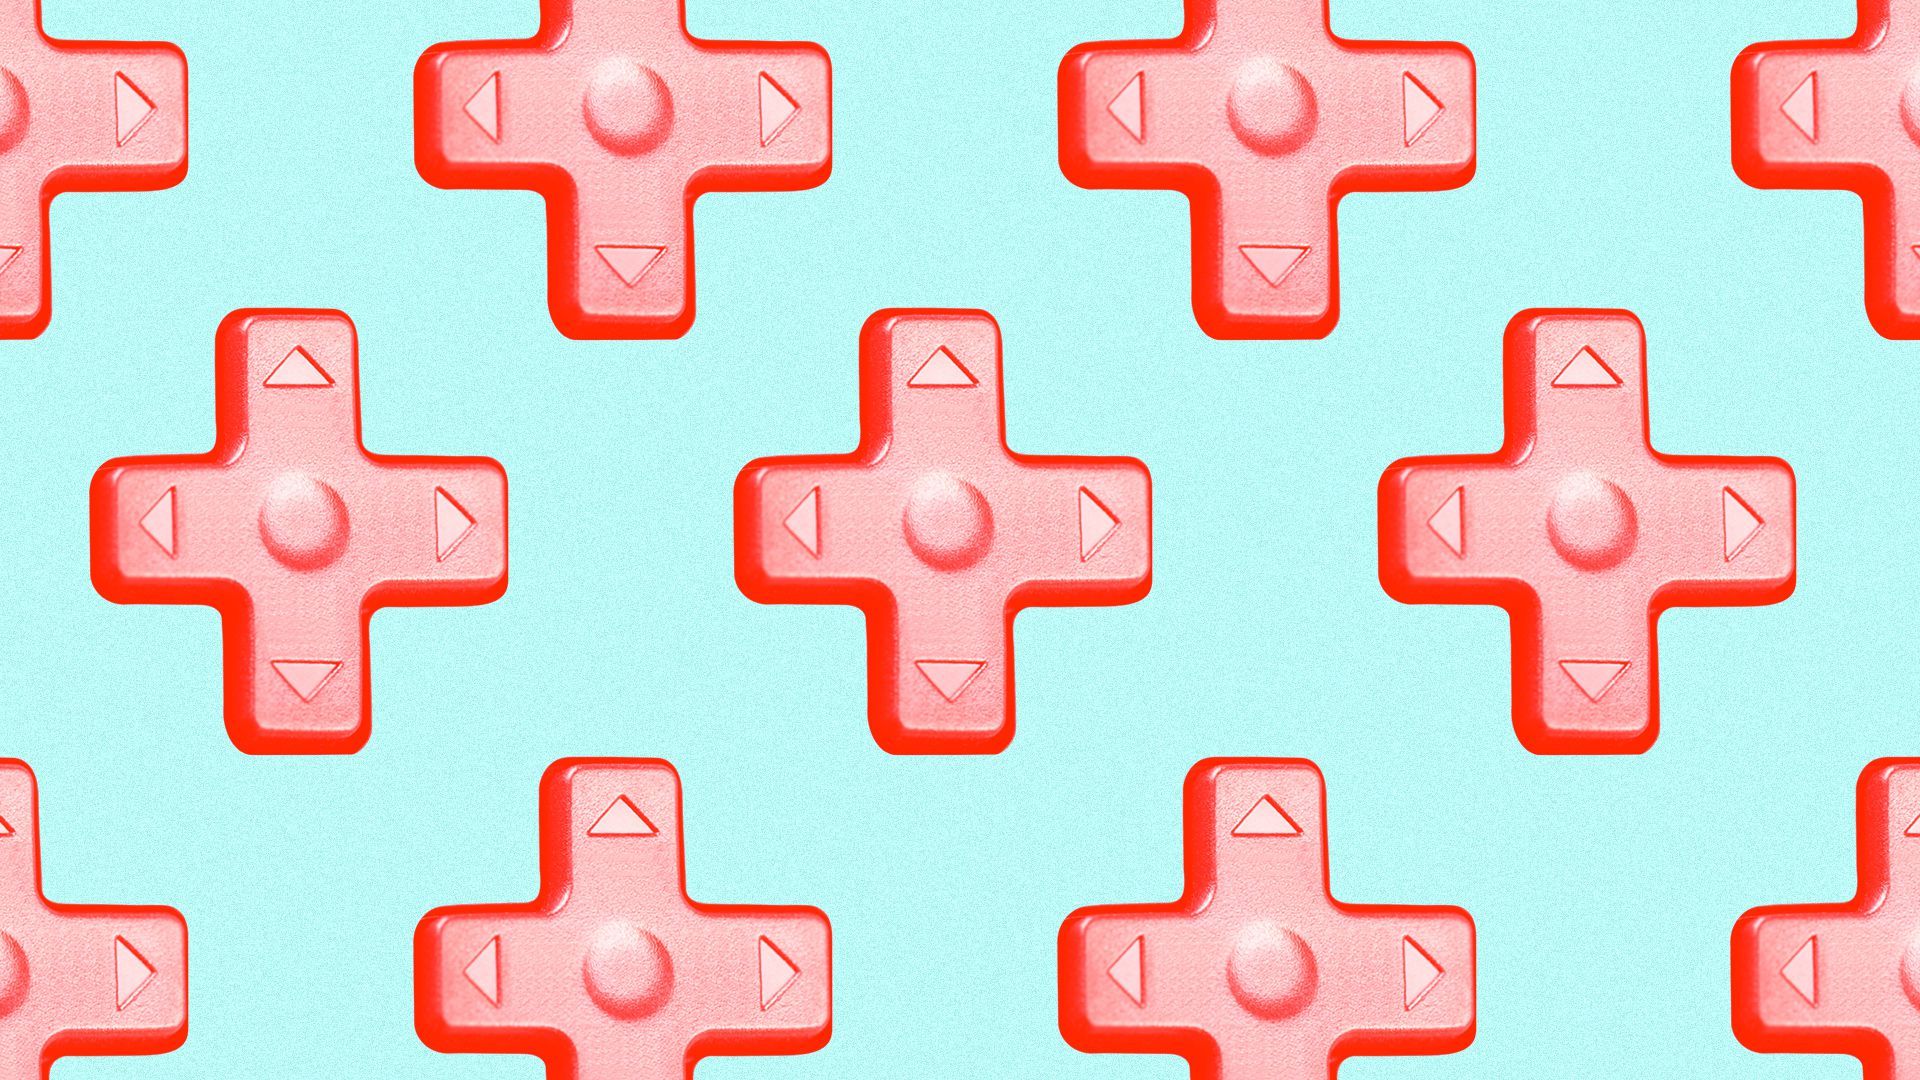 Illustration of a pattern of repeating d-pads stylized as red health pluses. 